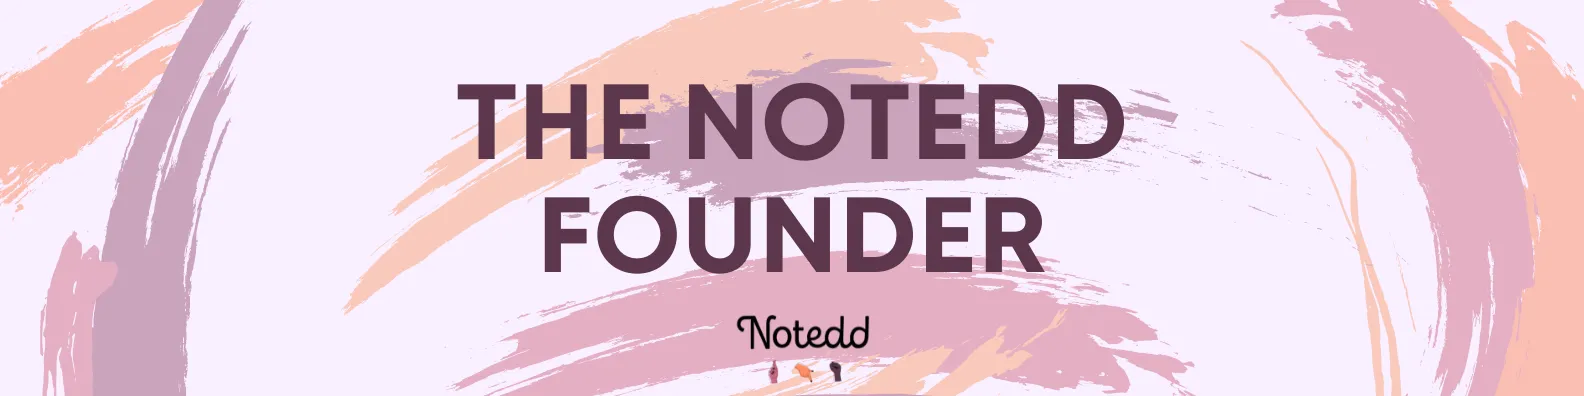 Text box stating The Notedd Founder